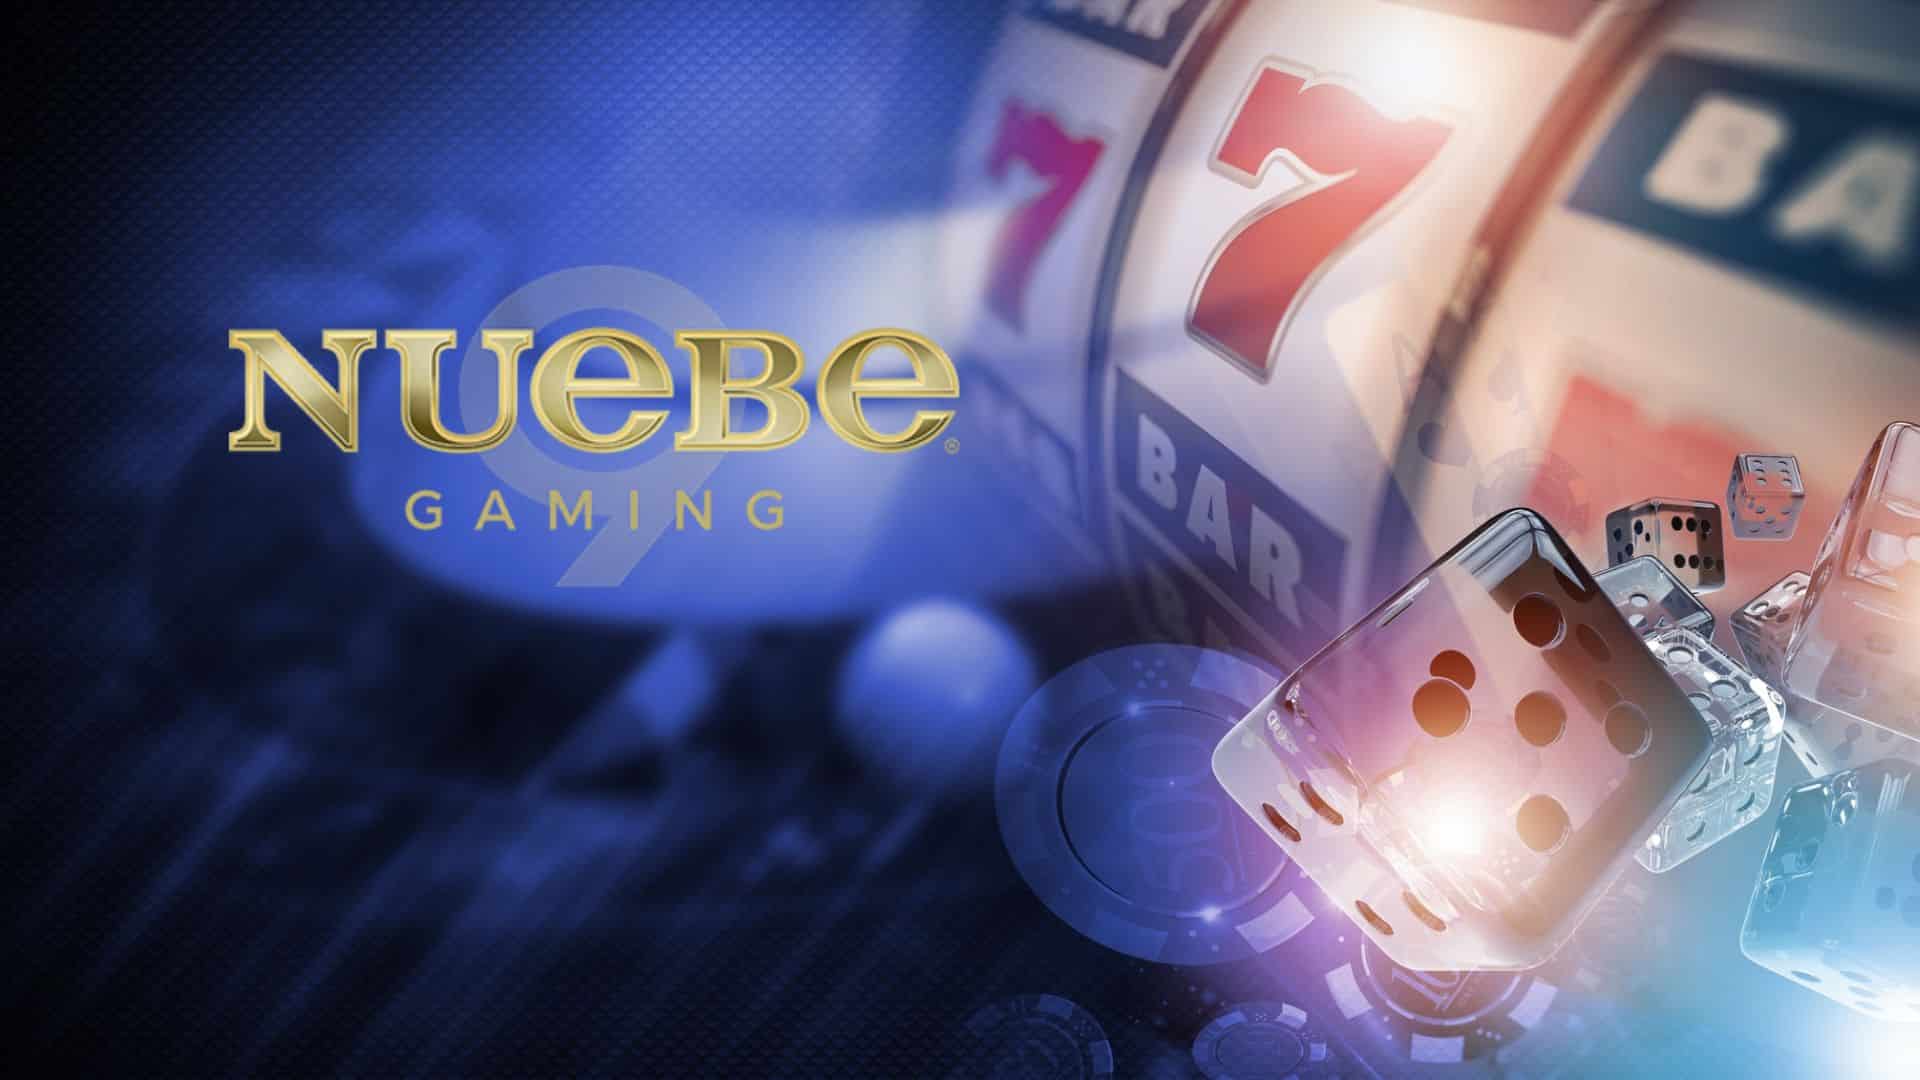 Join the Nuebe gaming community. Just register and get free bonus